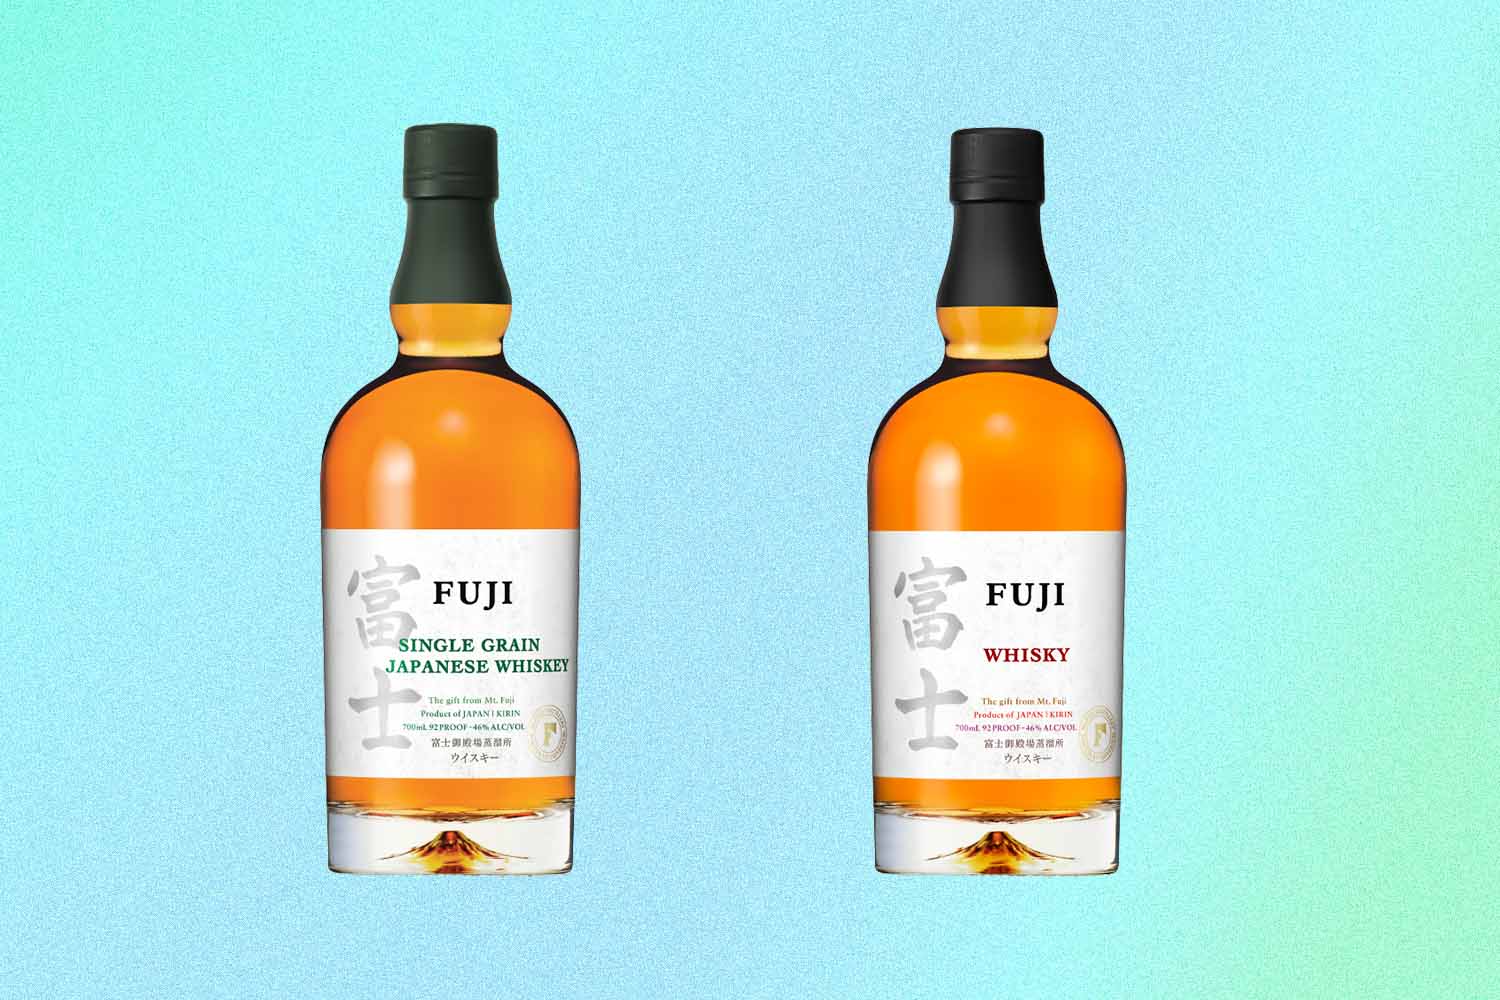 two expression of Fuji Whisky